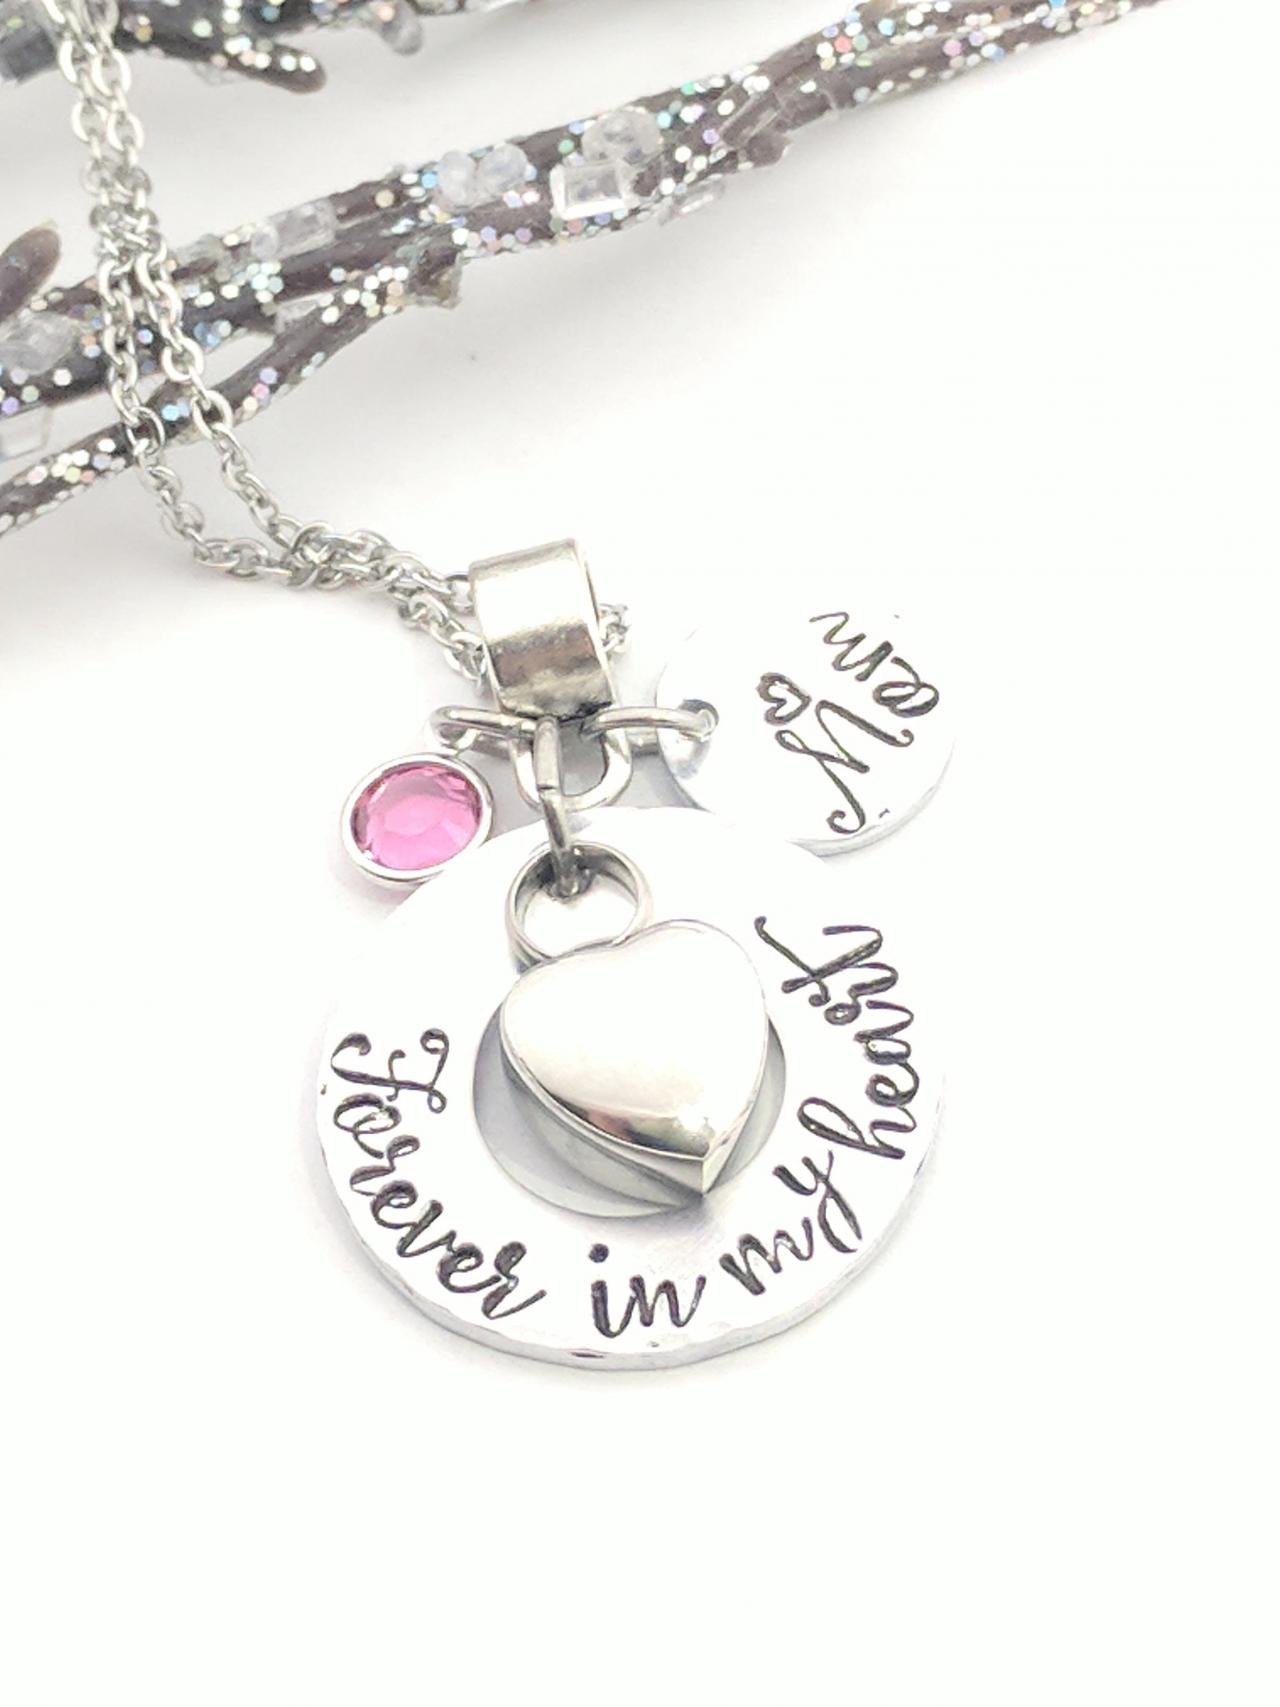 Forever In My Heart- Loss Jewelry- Remembrance Keepsake- Personalized- Birthstone- Heart Urn- Urn Necklace- Ashes- Cremation Jewelry- Gift